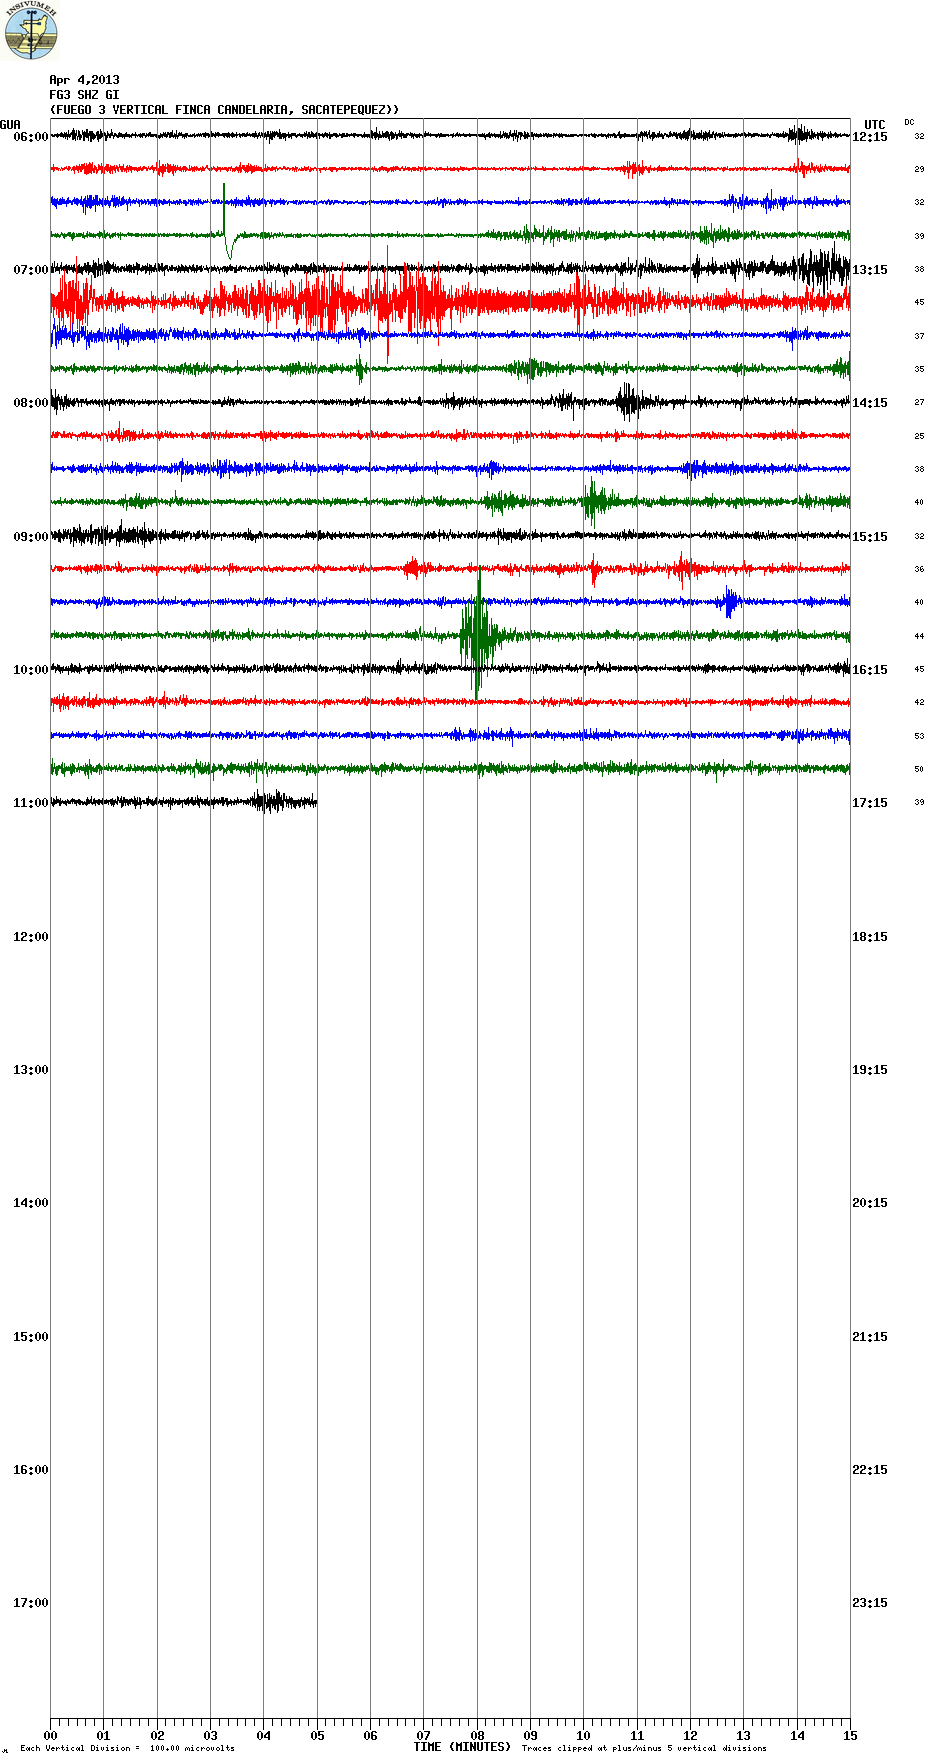 Current seismic signal from Fuego (FG3 station, INSIVUMEH)